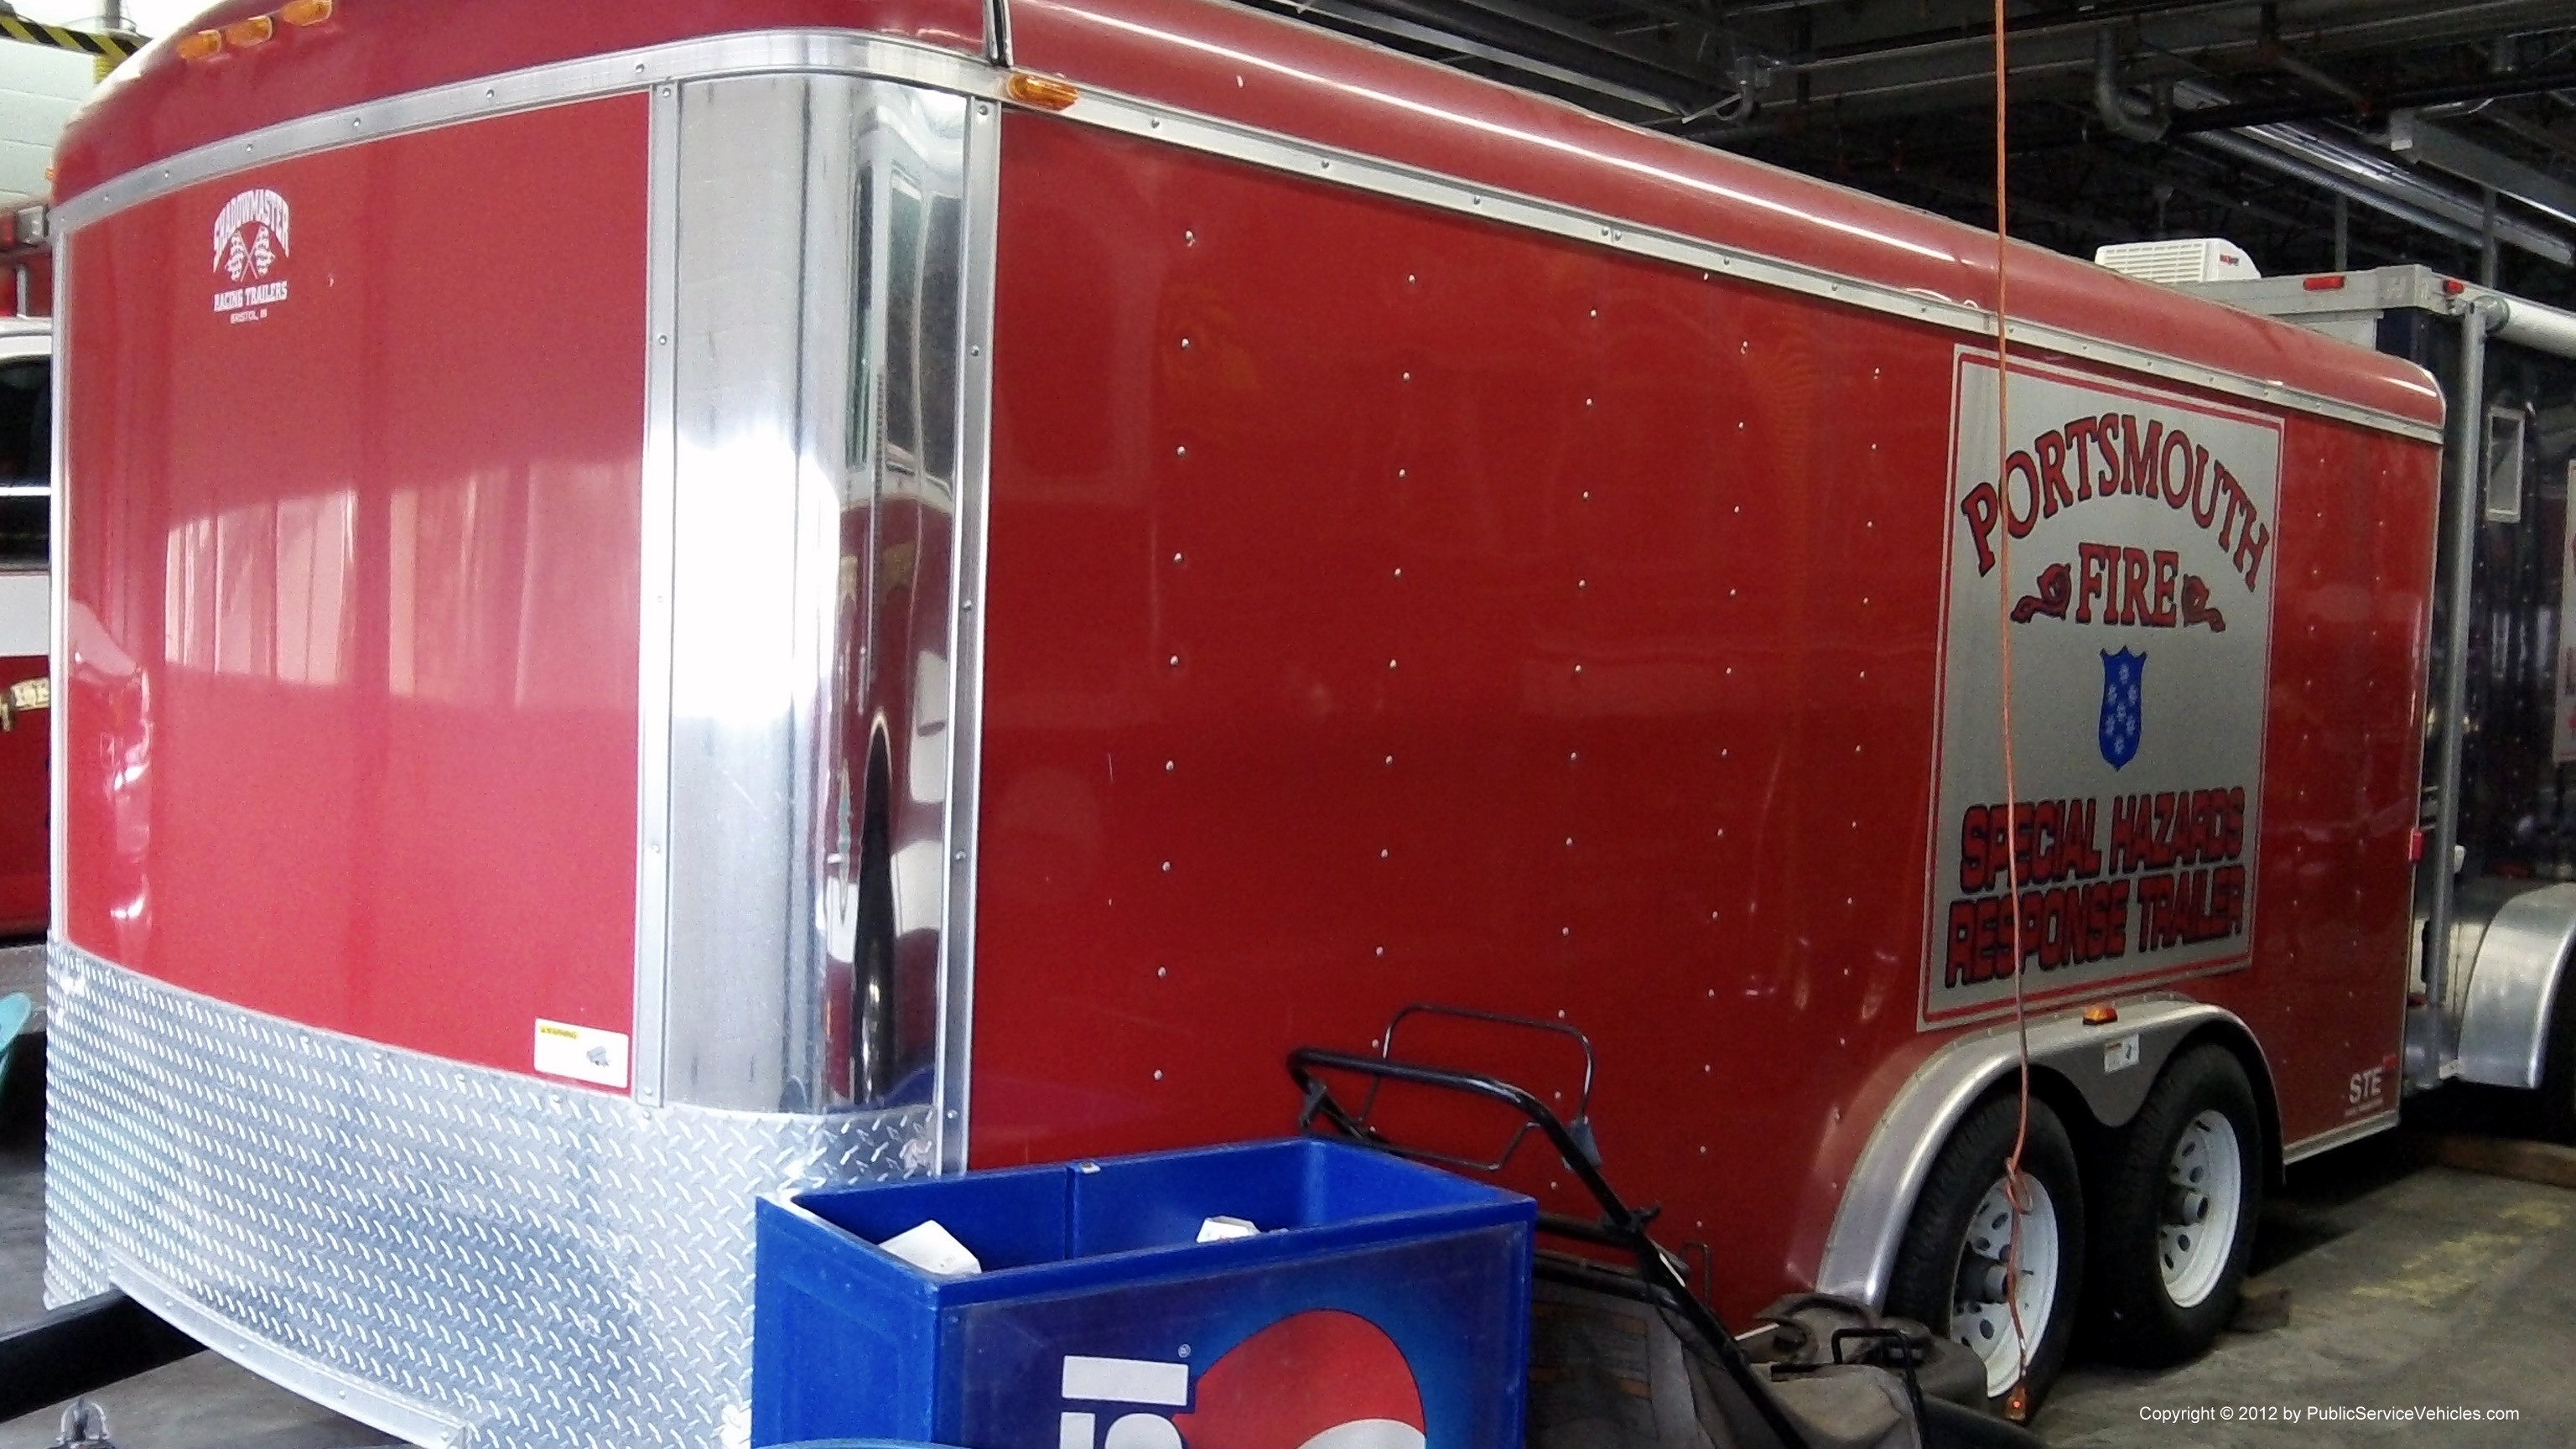 A photo  of Portsmouth Fire
            Special Hazards Response Trailer, a 2000-2010 Shadowmaster Racing Trailers Trailer             taken by Kieran Egan